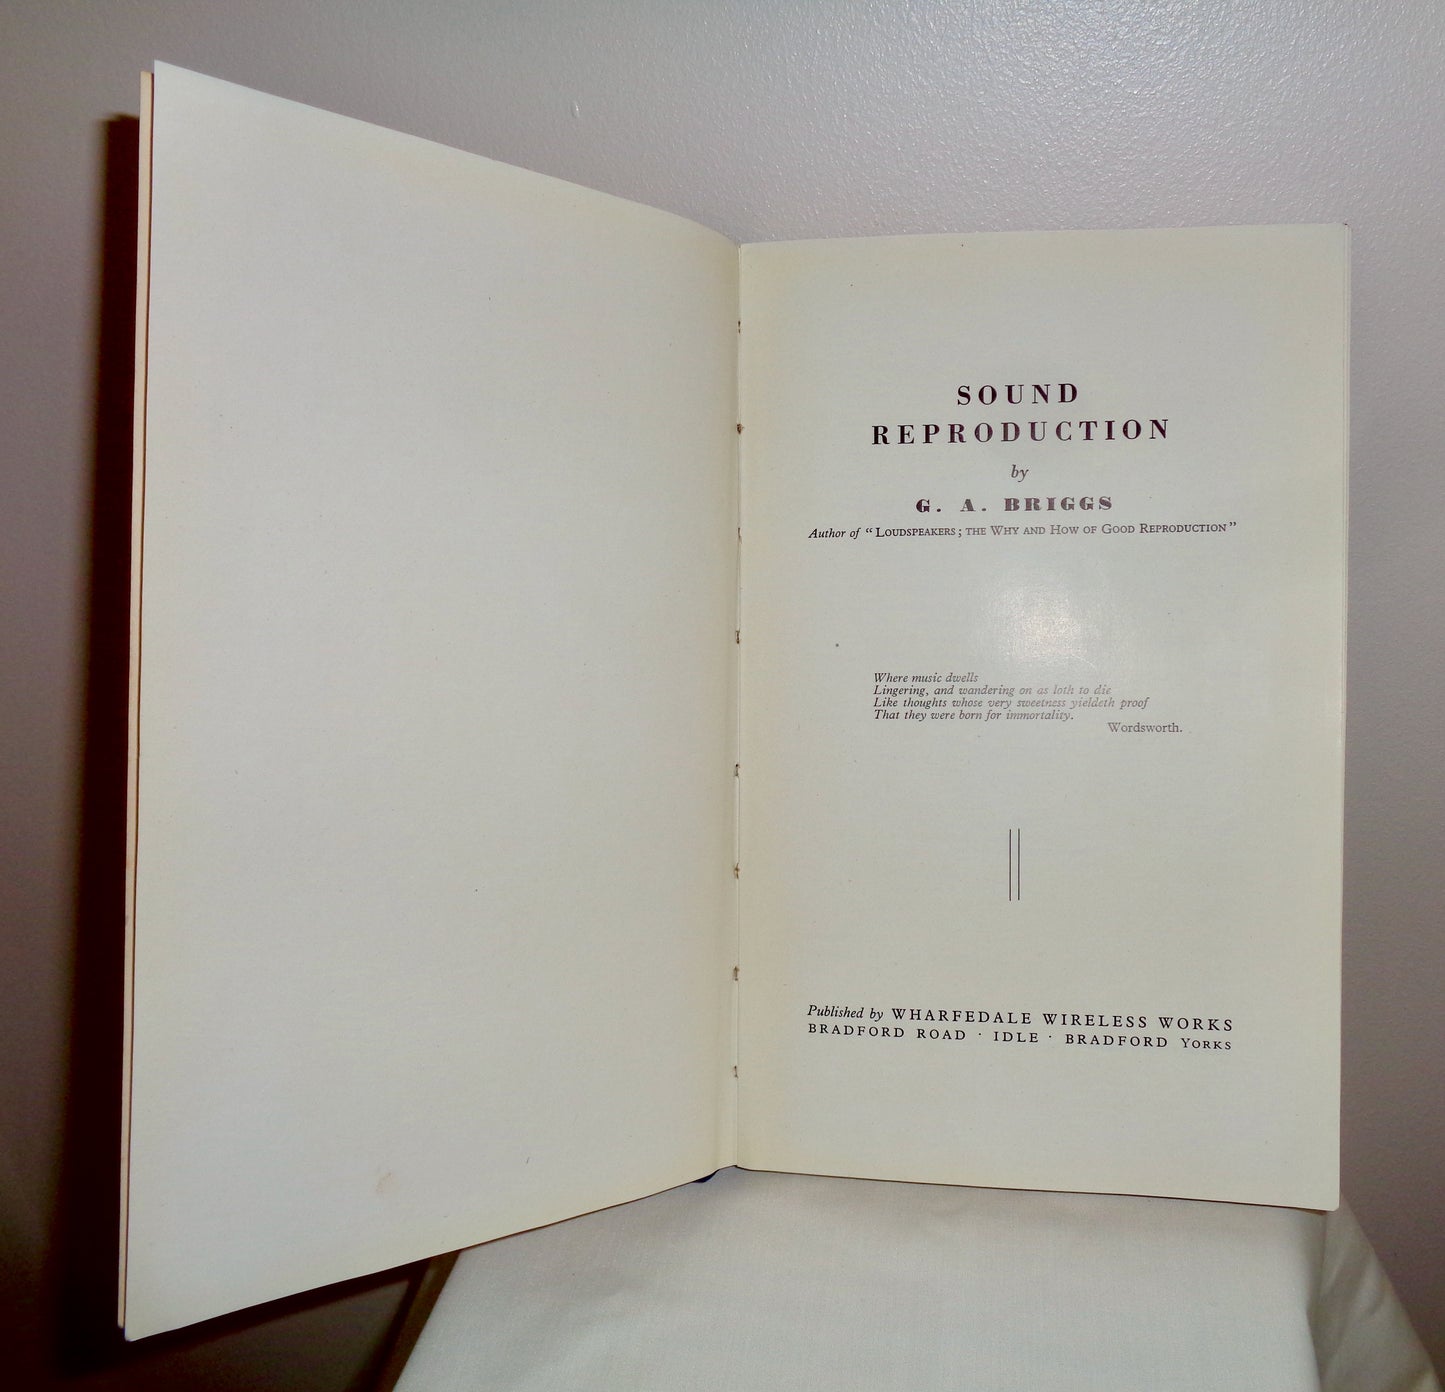 1949 First Edition Of Sound Reproduction By Gilbert A Briggs